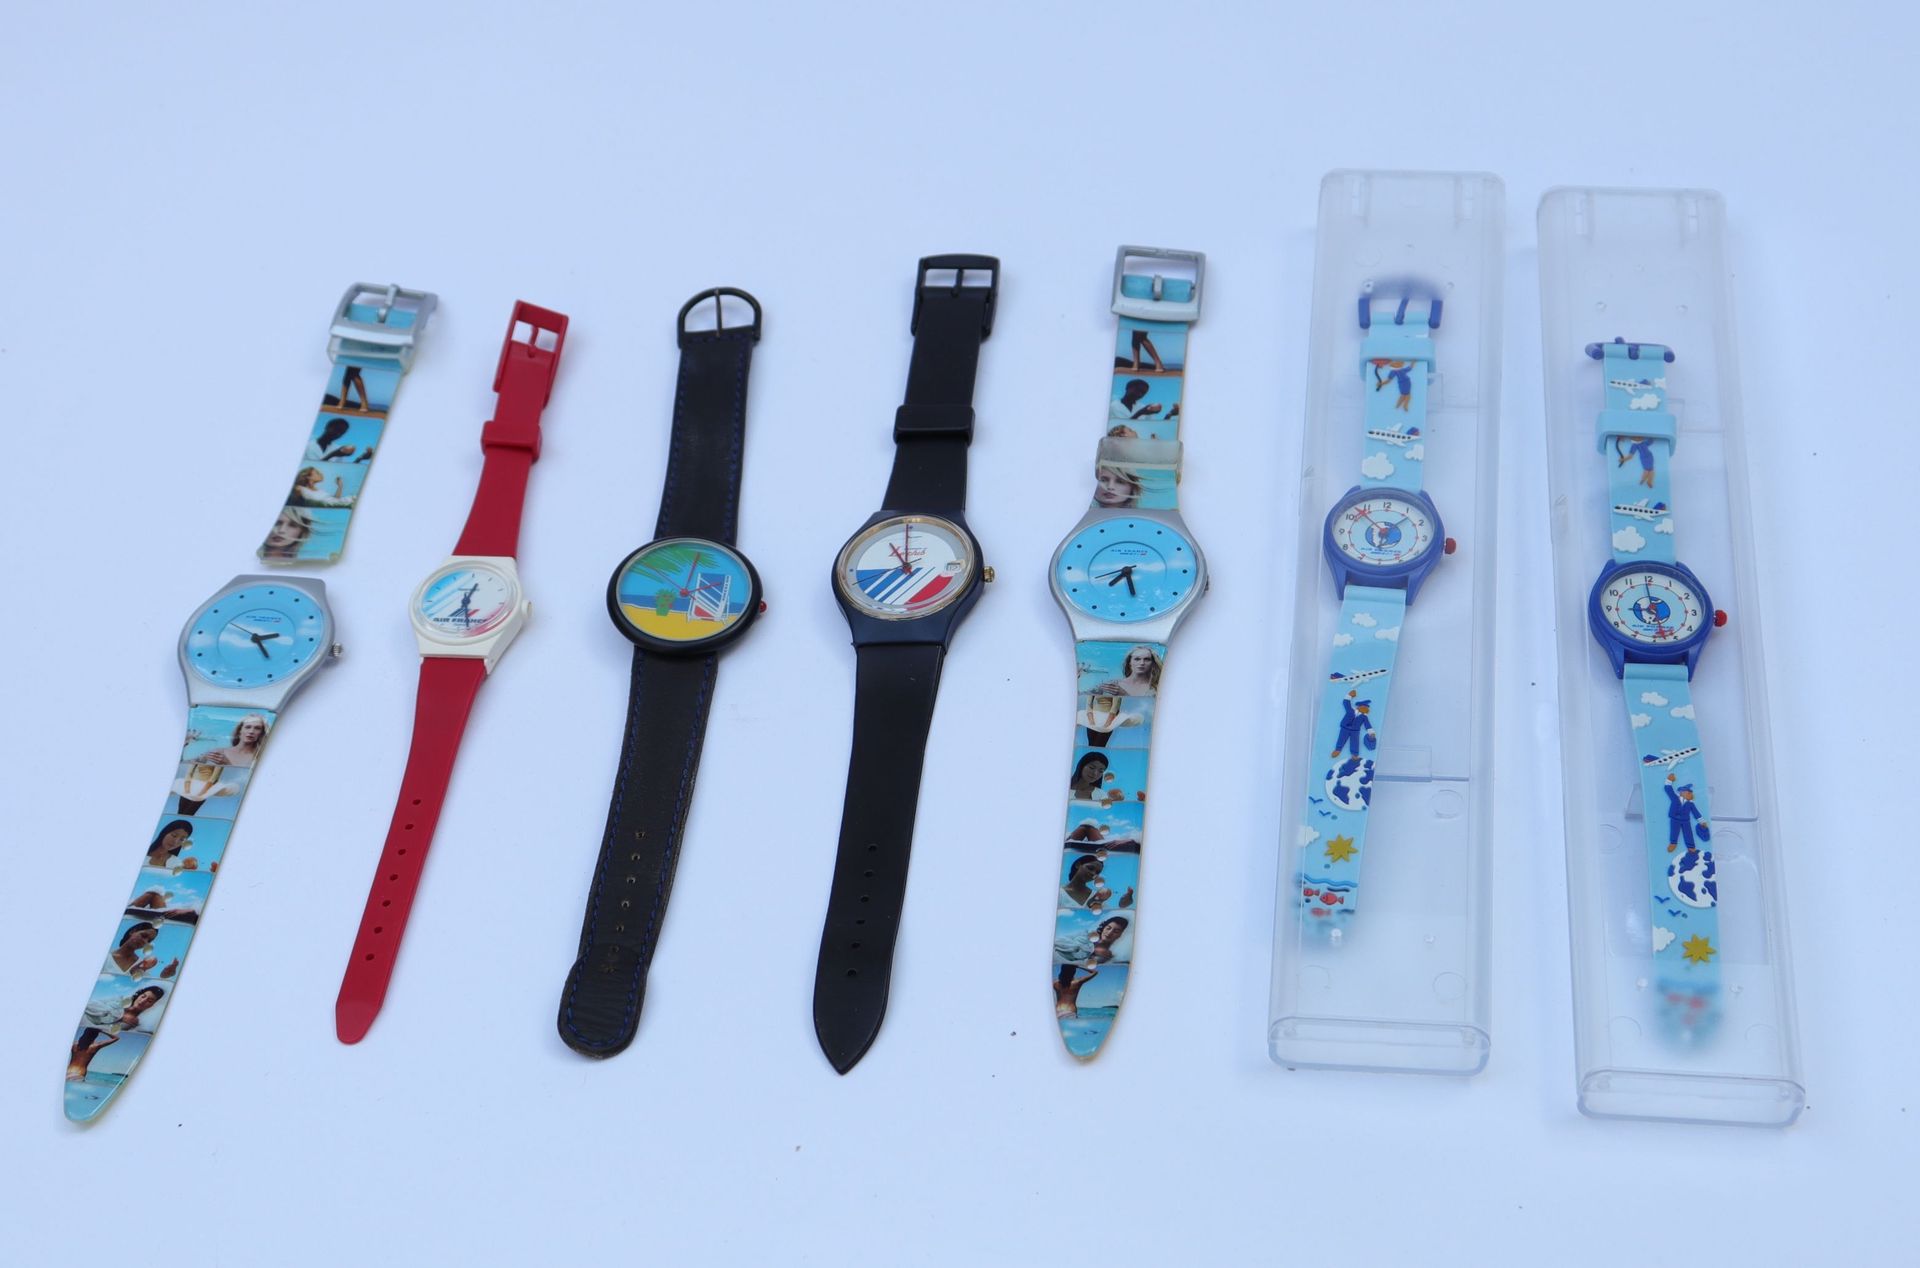 Null AIR FRANCE WATCHES.

7 plastic wristwatches including 2 Kid models. 

The d&hellip;